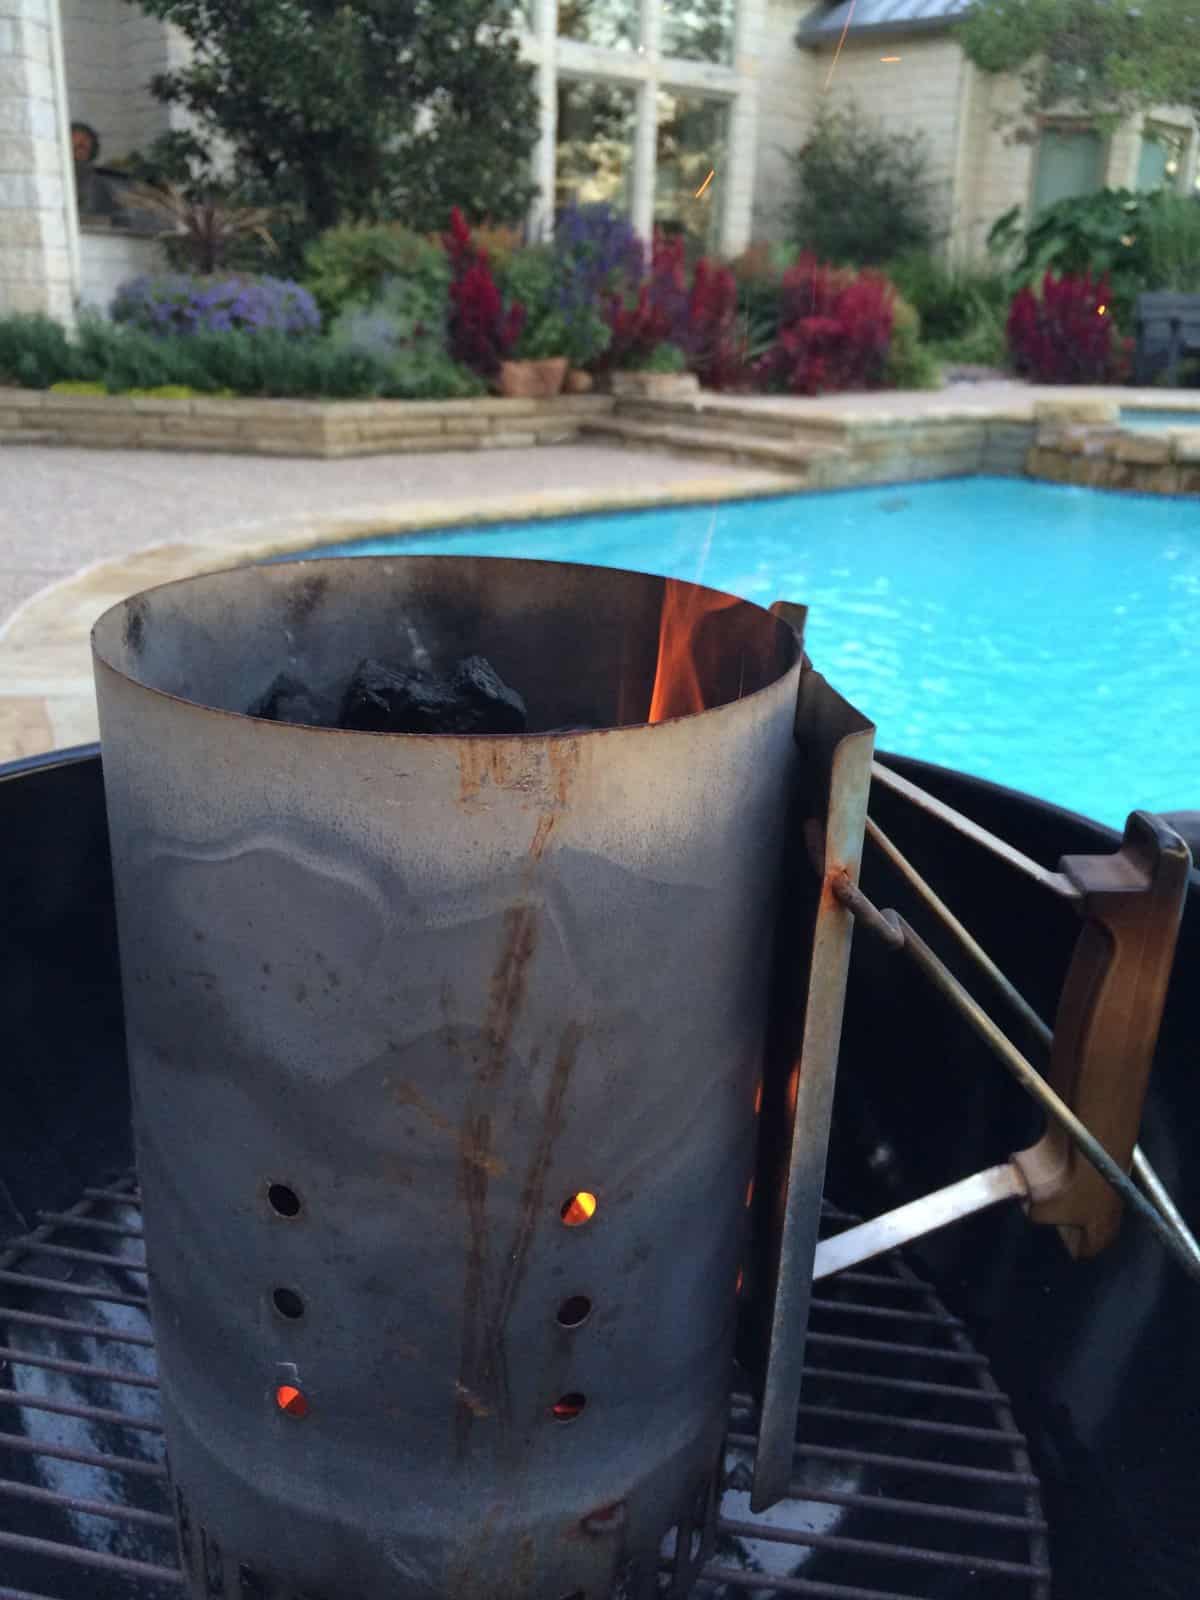 How do you start a charcoal grill?